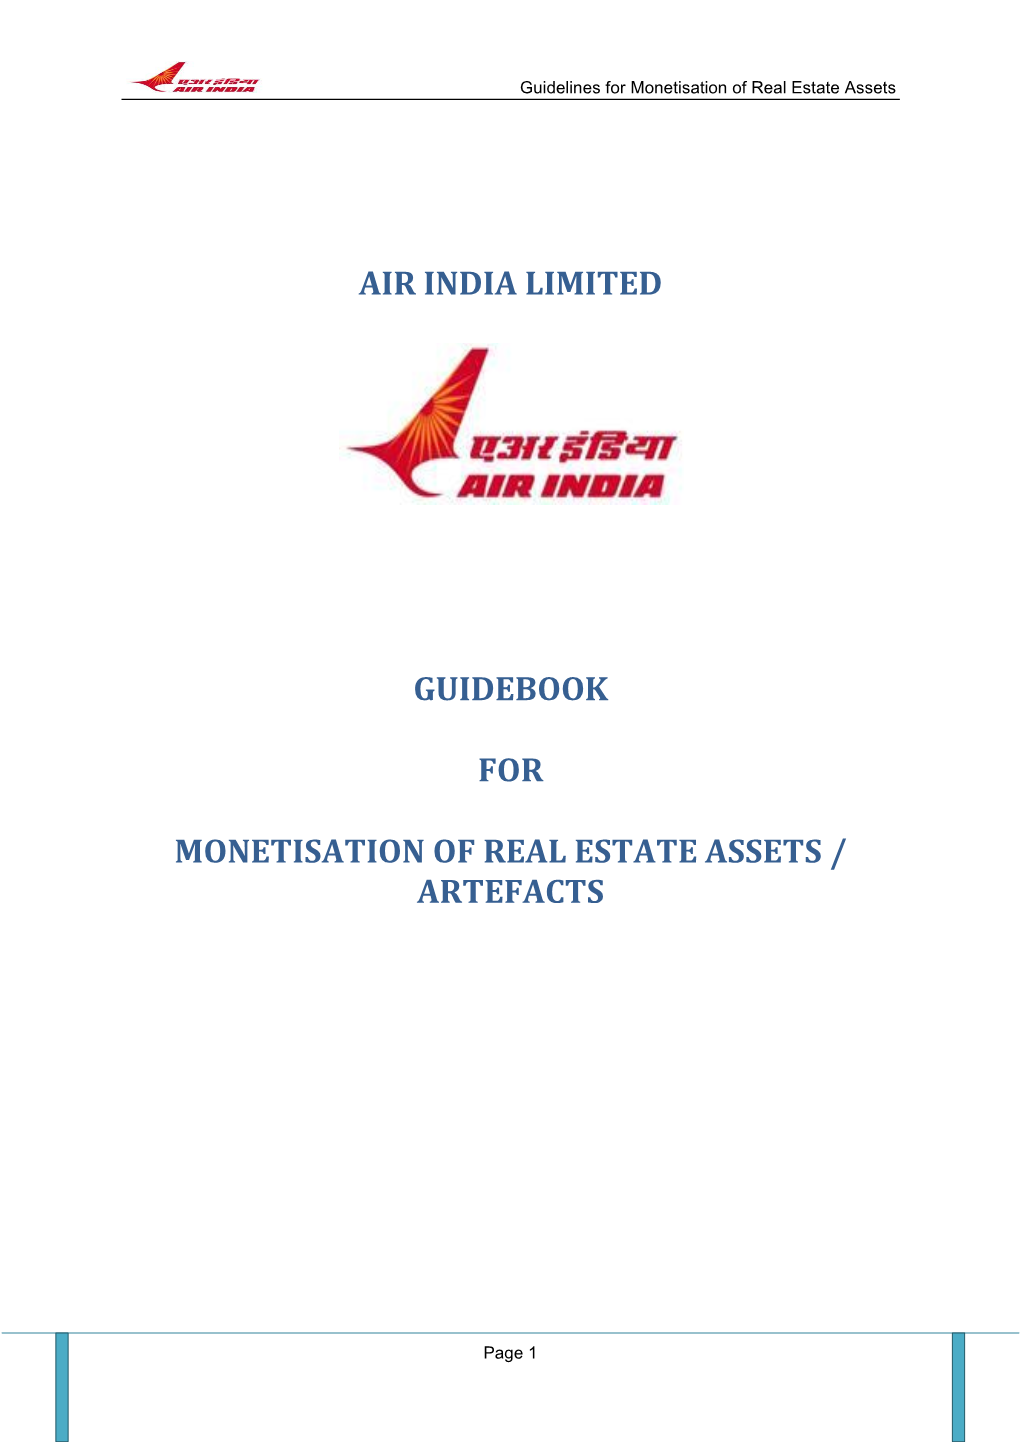 Air India Limited Guidebook for Monetisation of Real